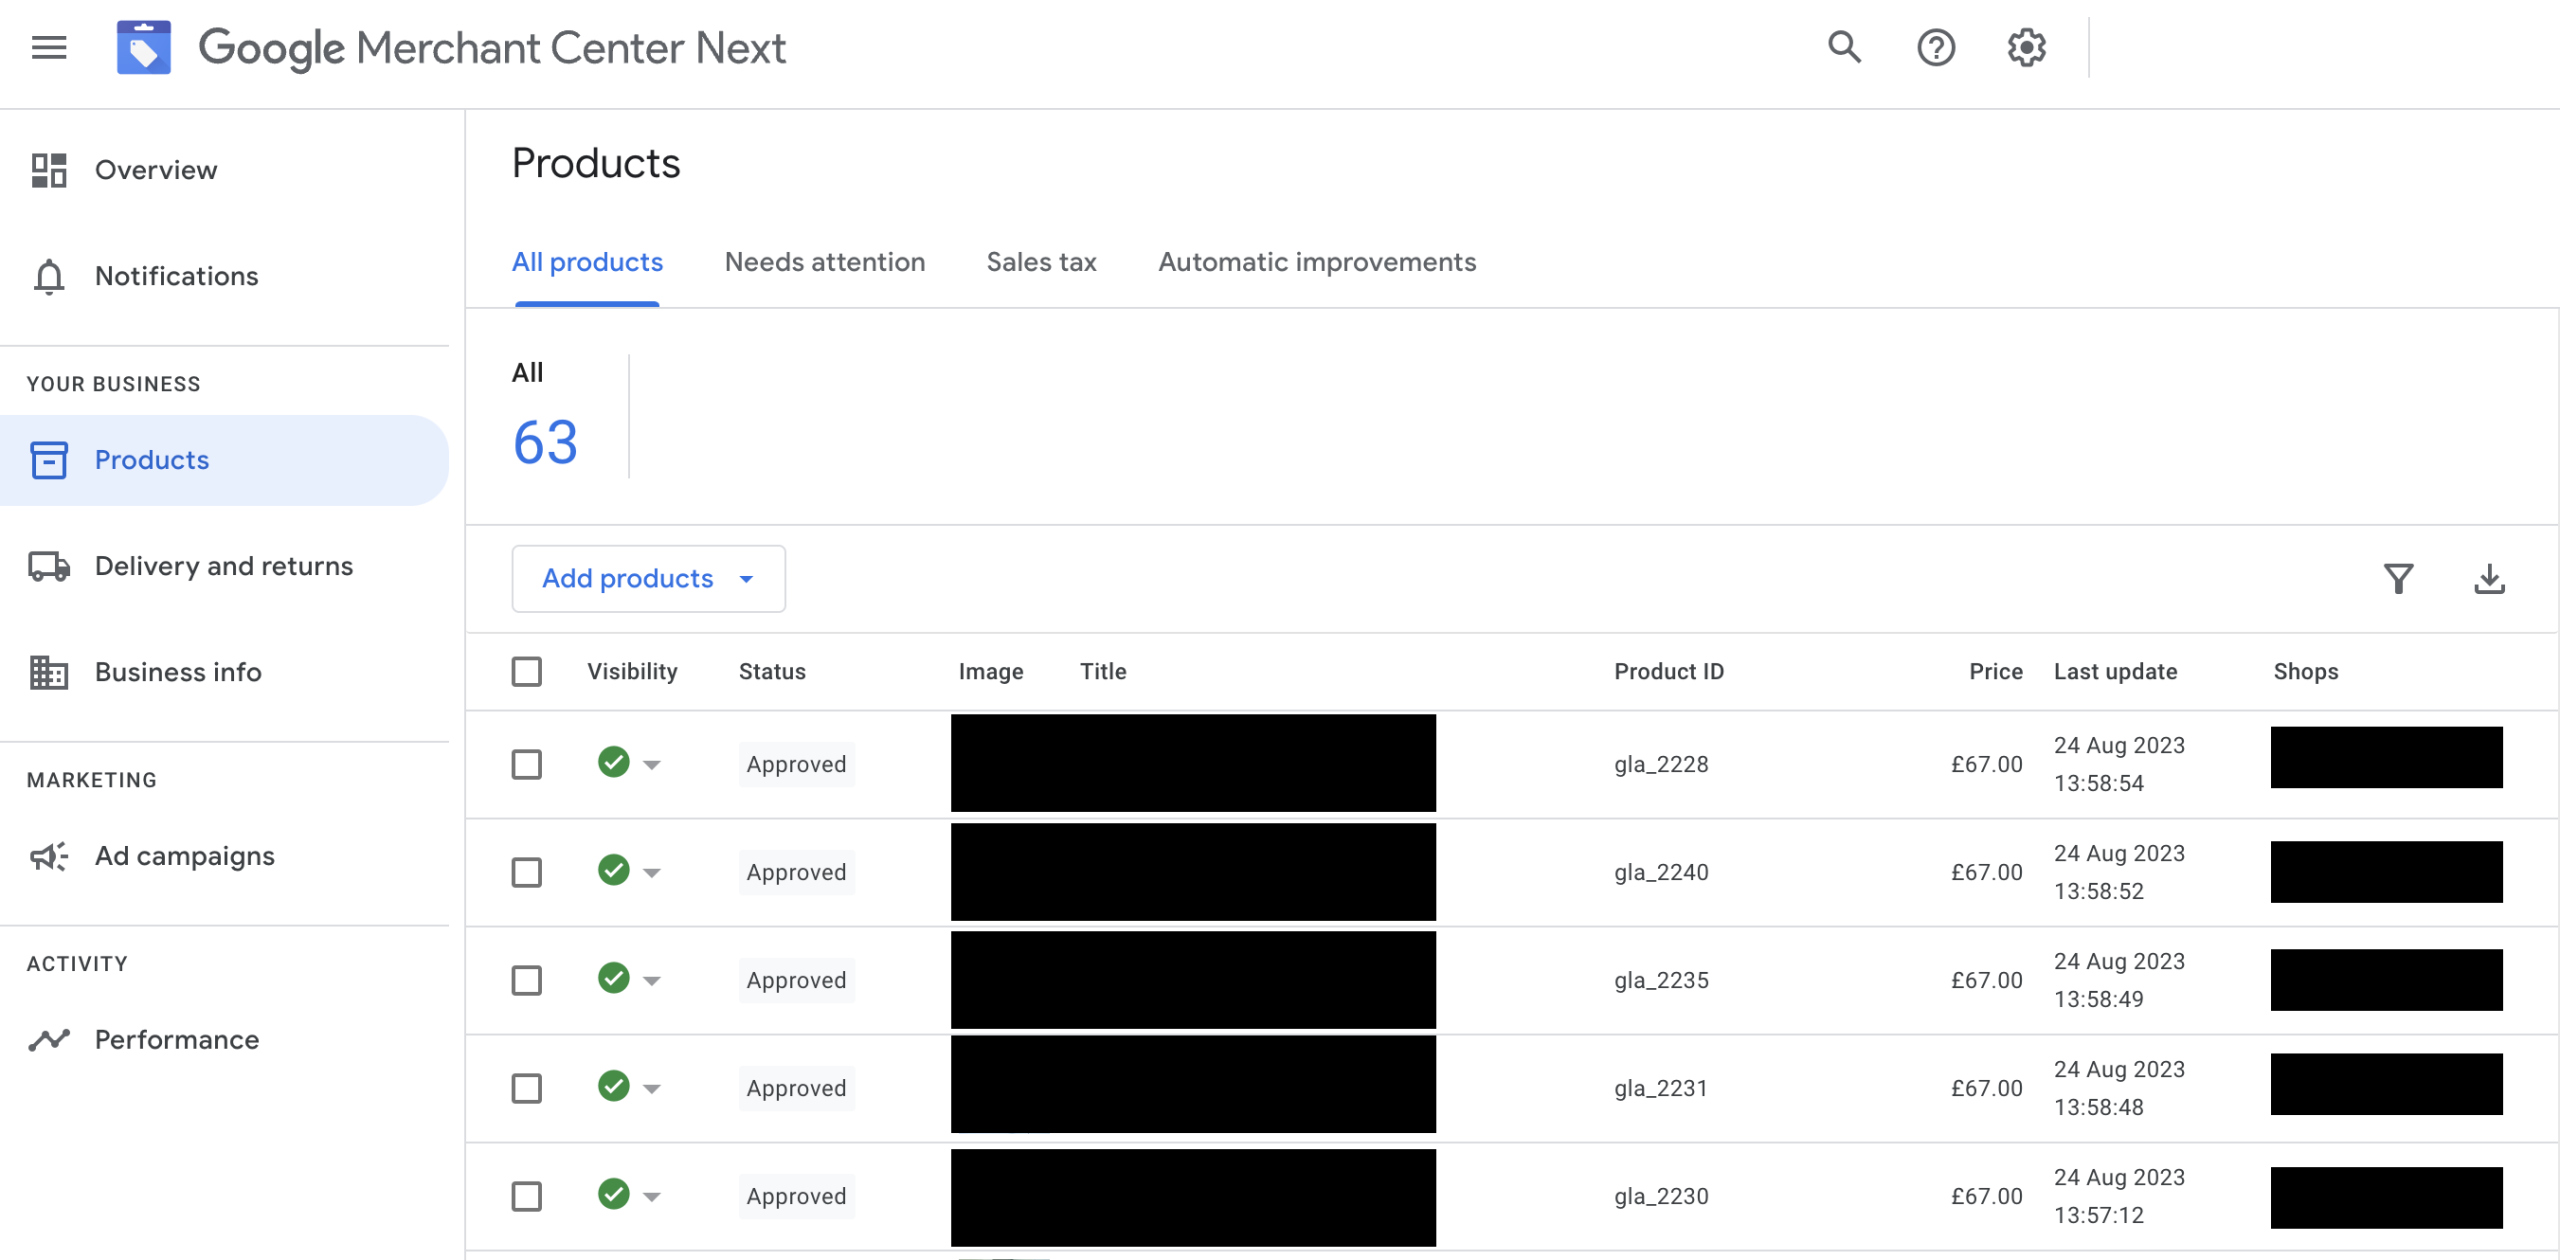 Screen shot of Products tab in the Google Merchant Center Next interface